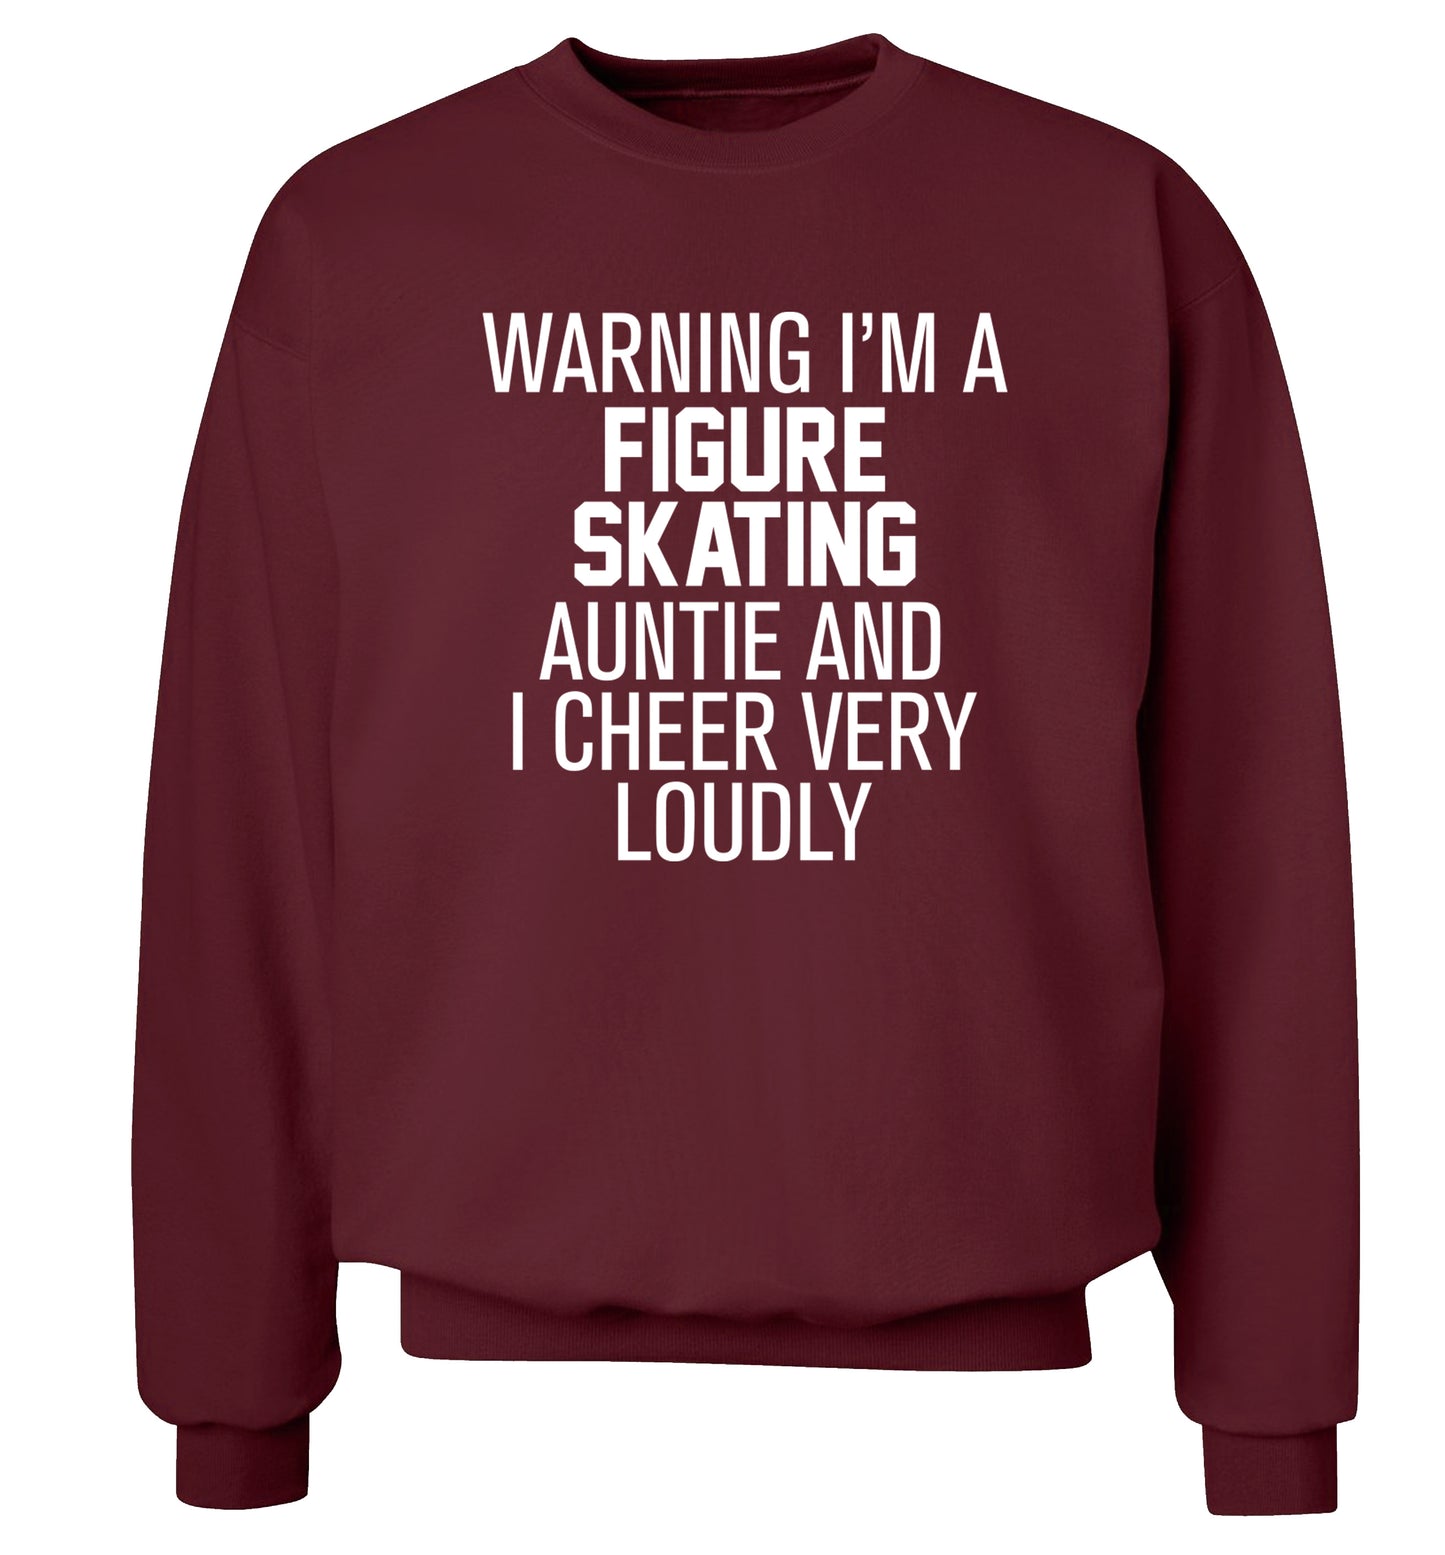 Warning I'm a figure skating auntie and I cheer very loudly Adult's unisexmaroon Sweater 2XL